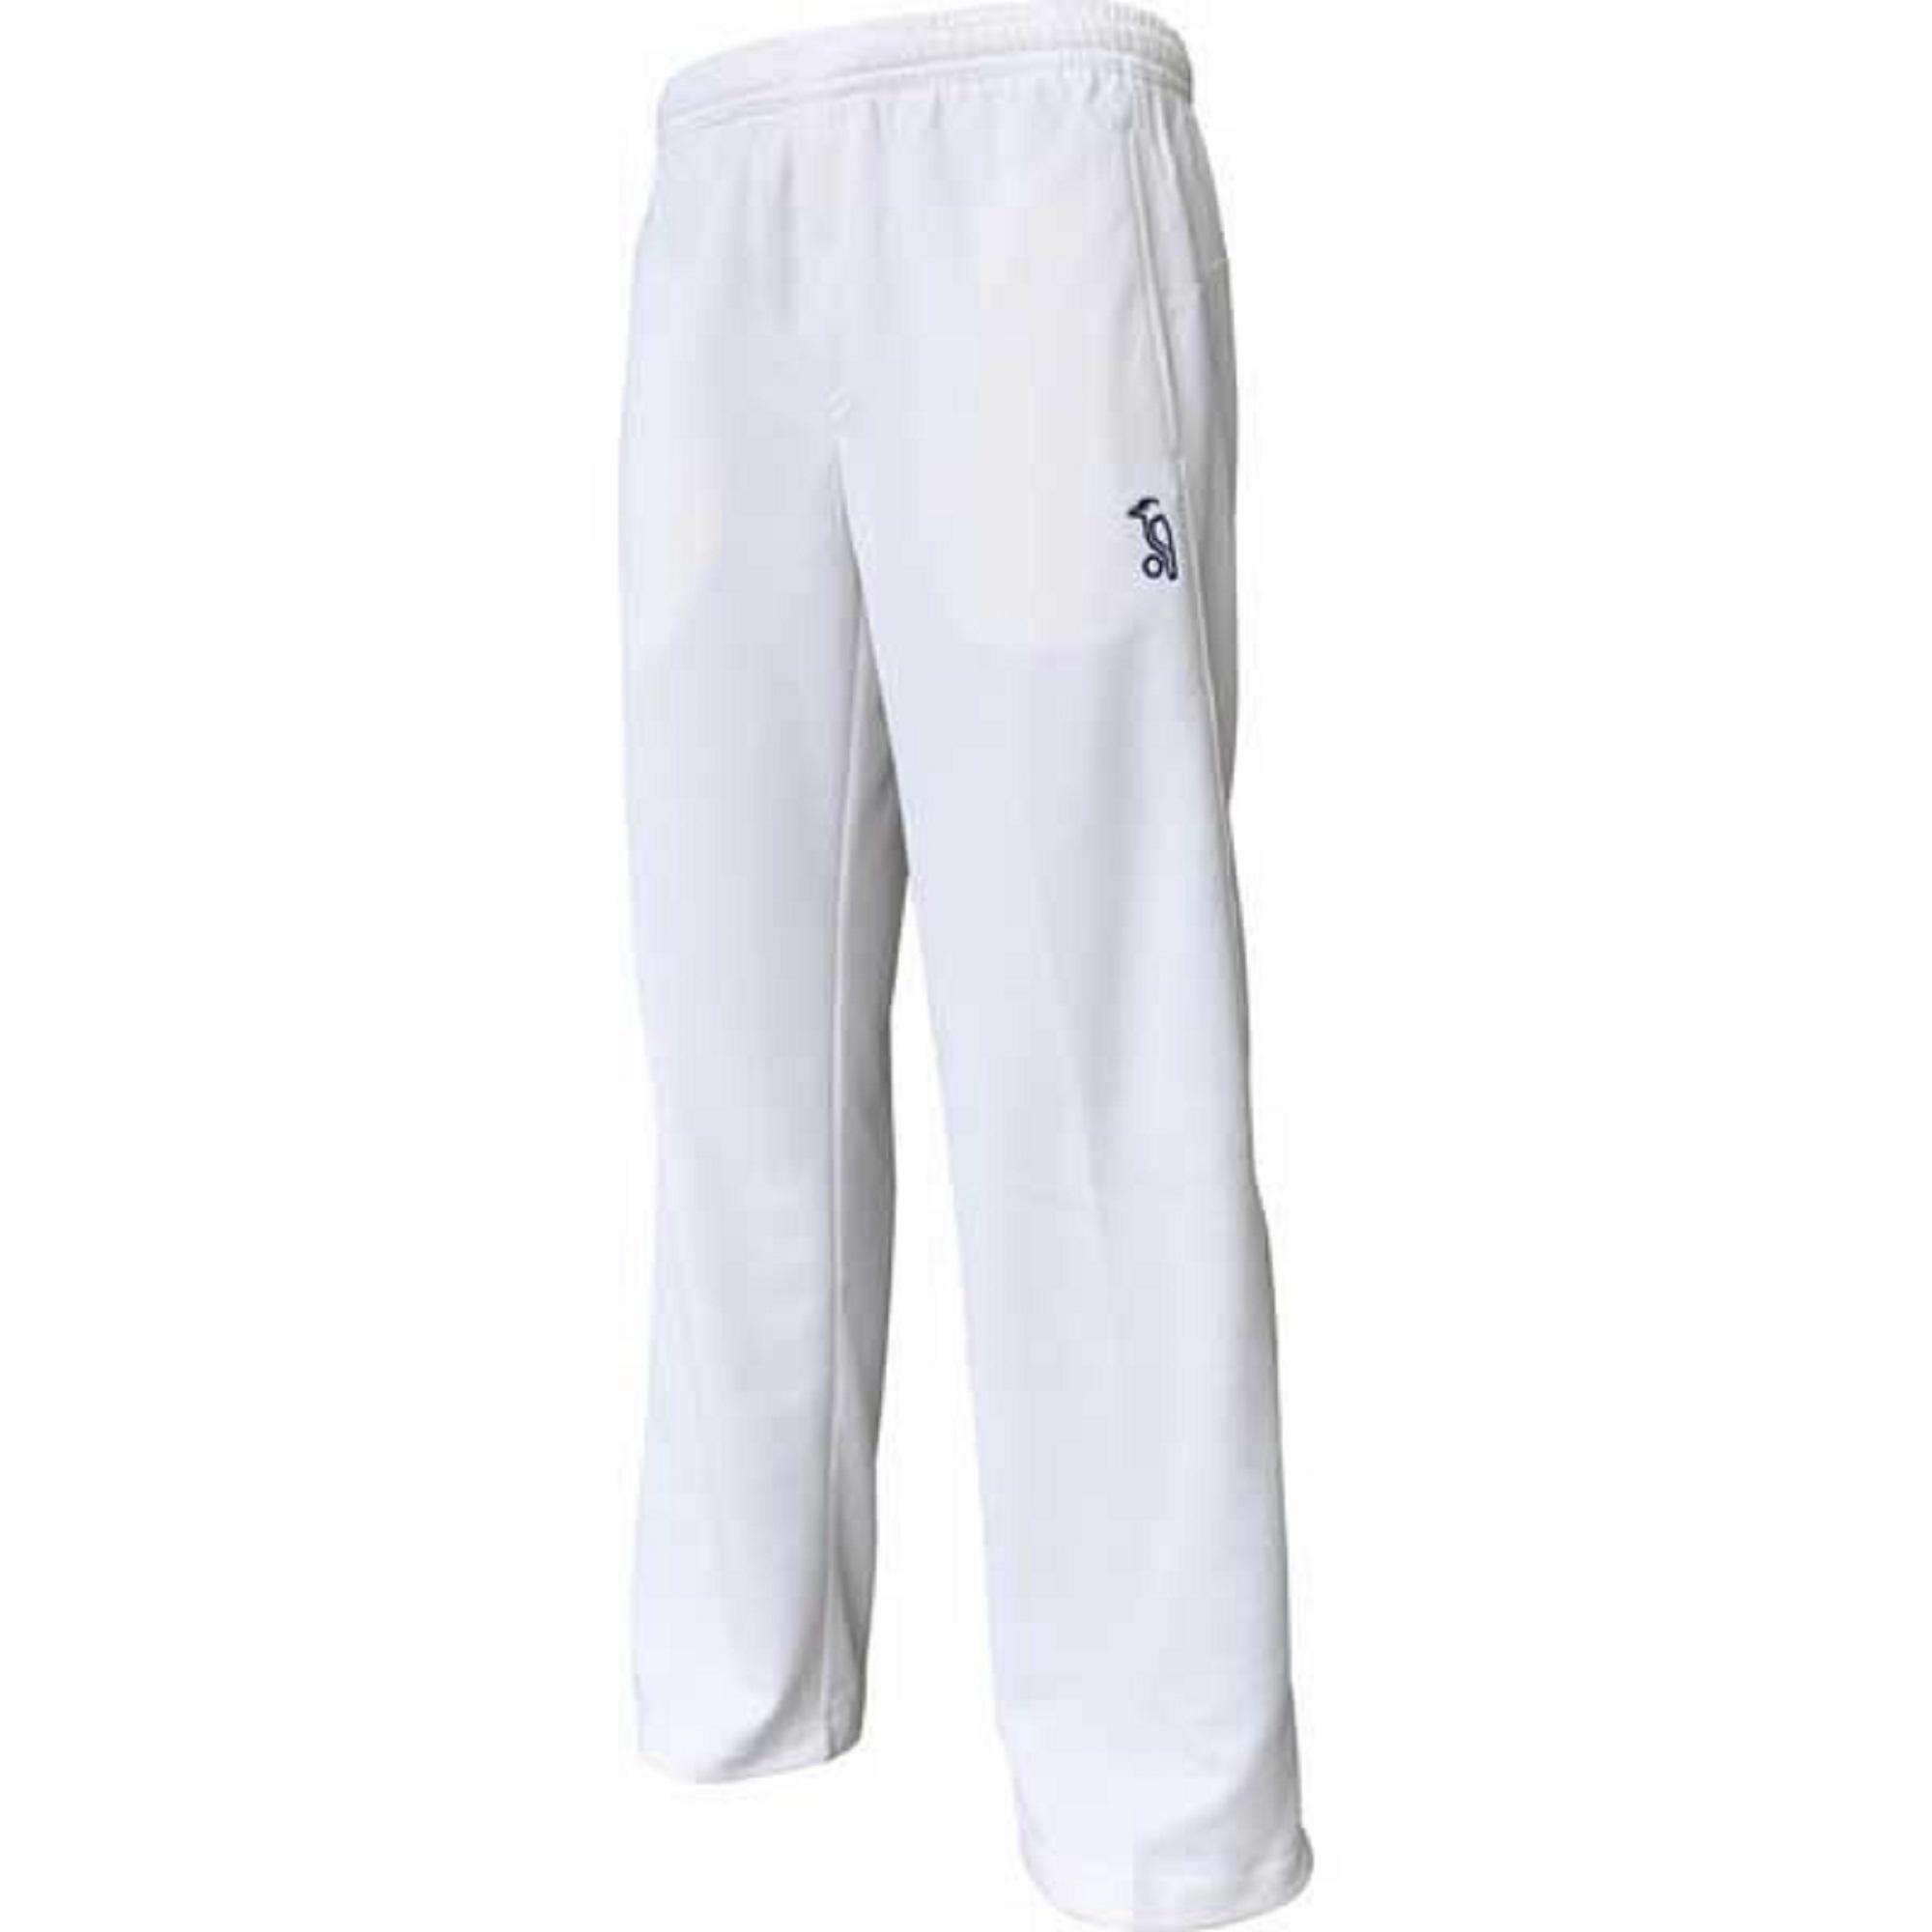 Pro Player Kids cricket trousers 1/3